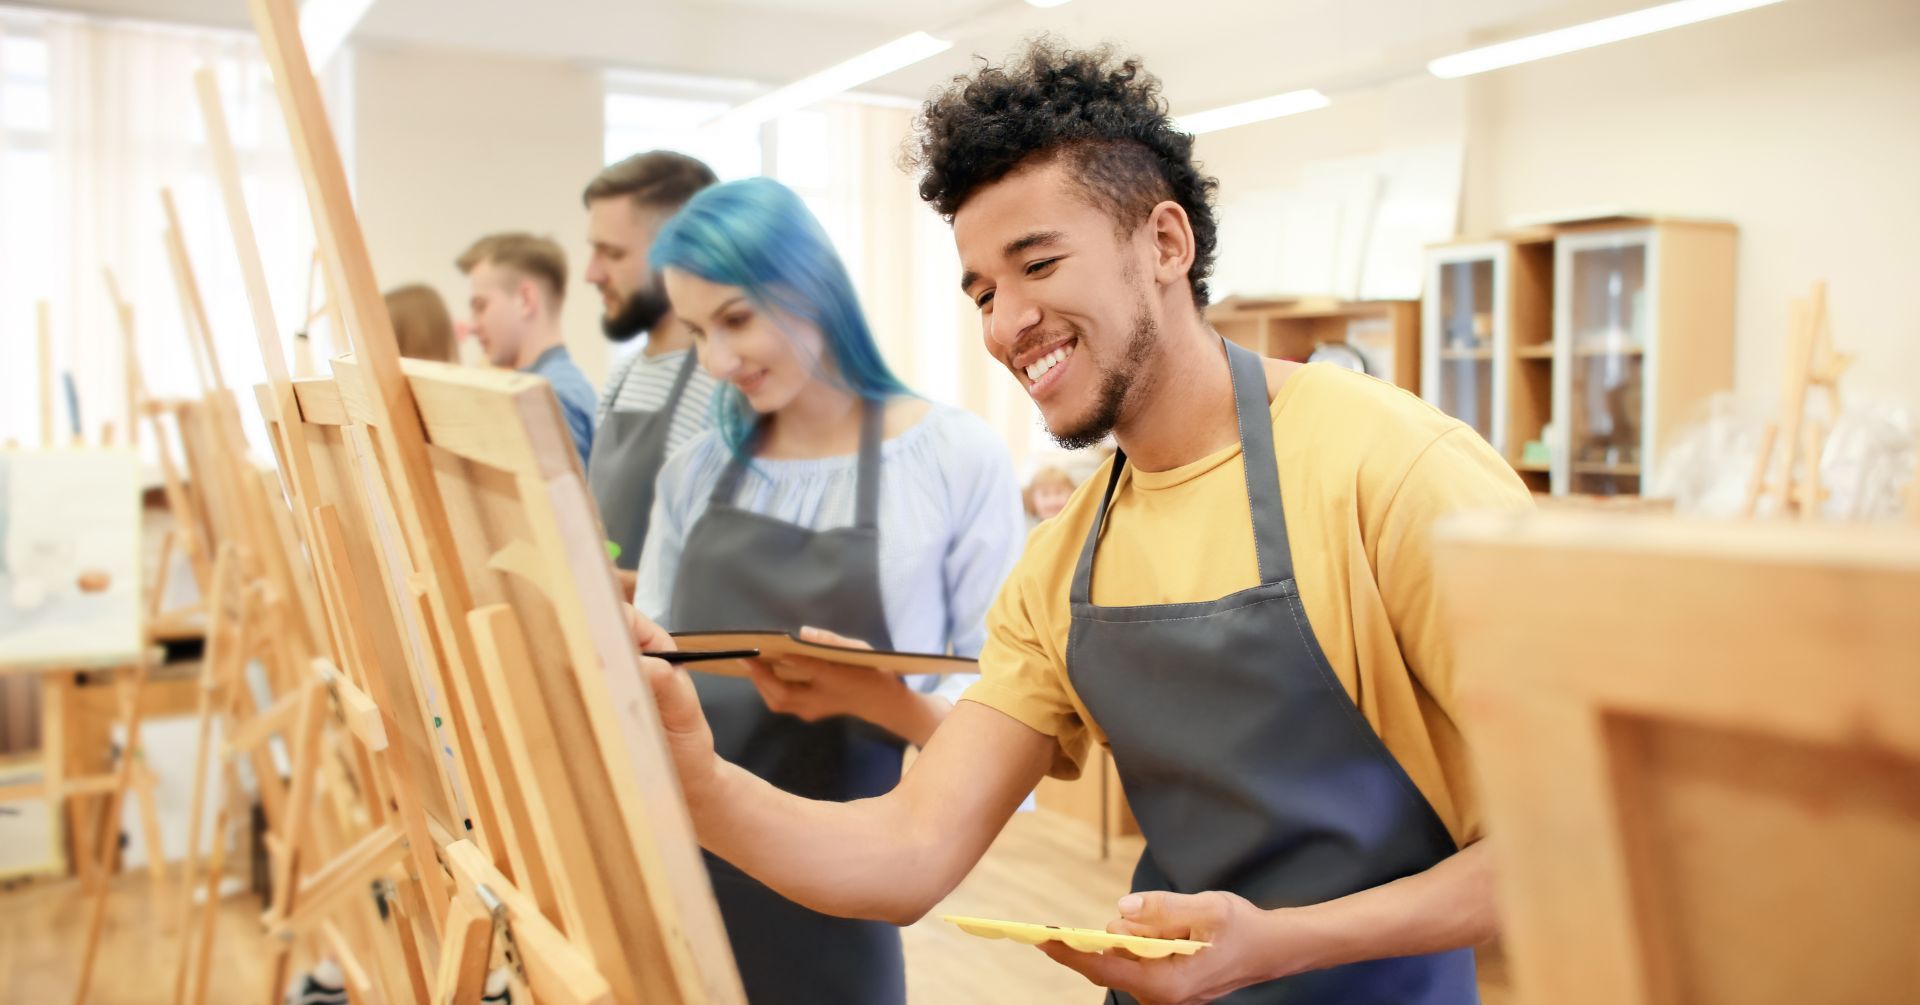 Young man painting with other young people in a workshop environment